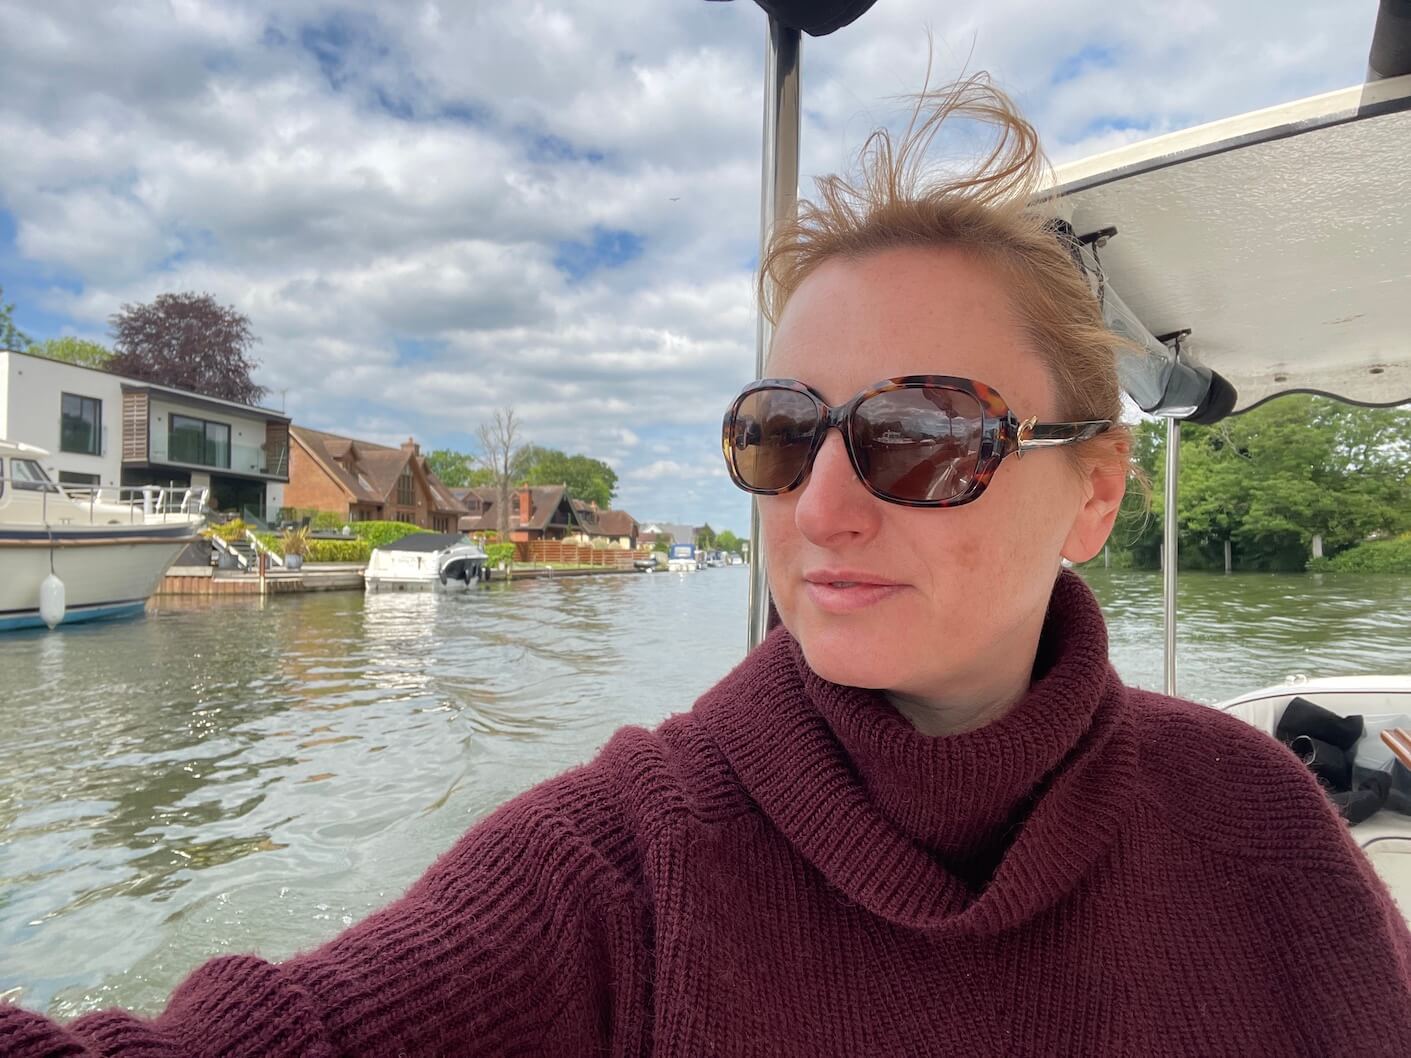 hiring a boat on the Thames